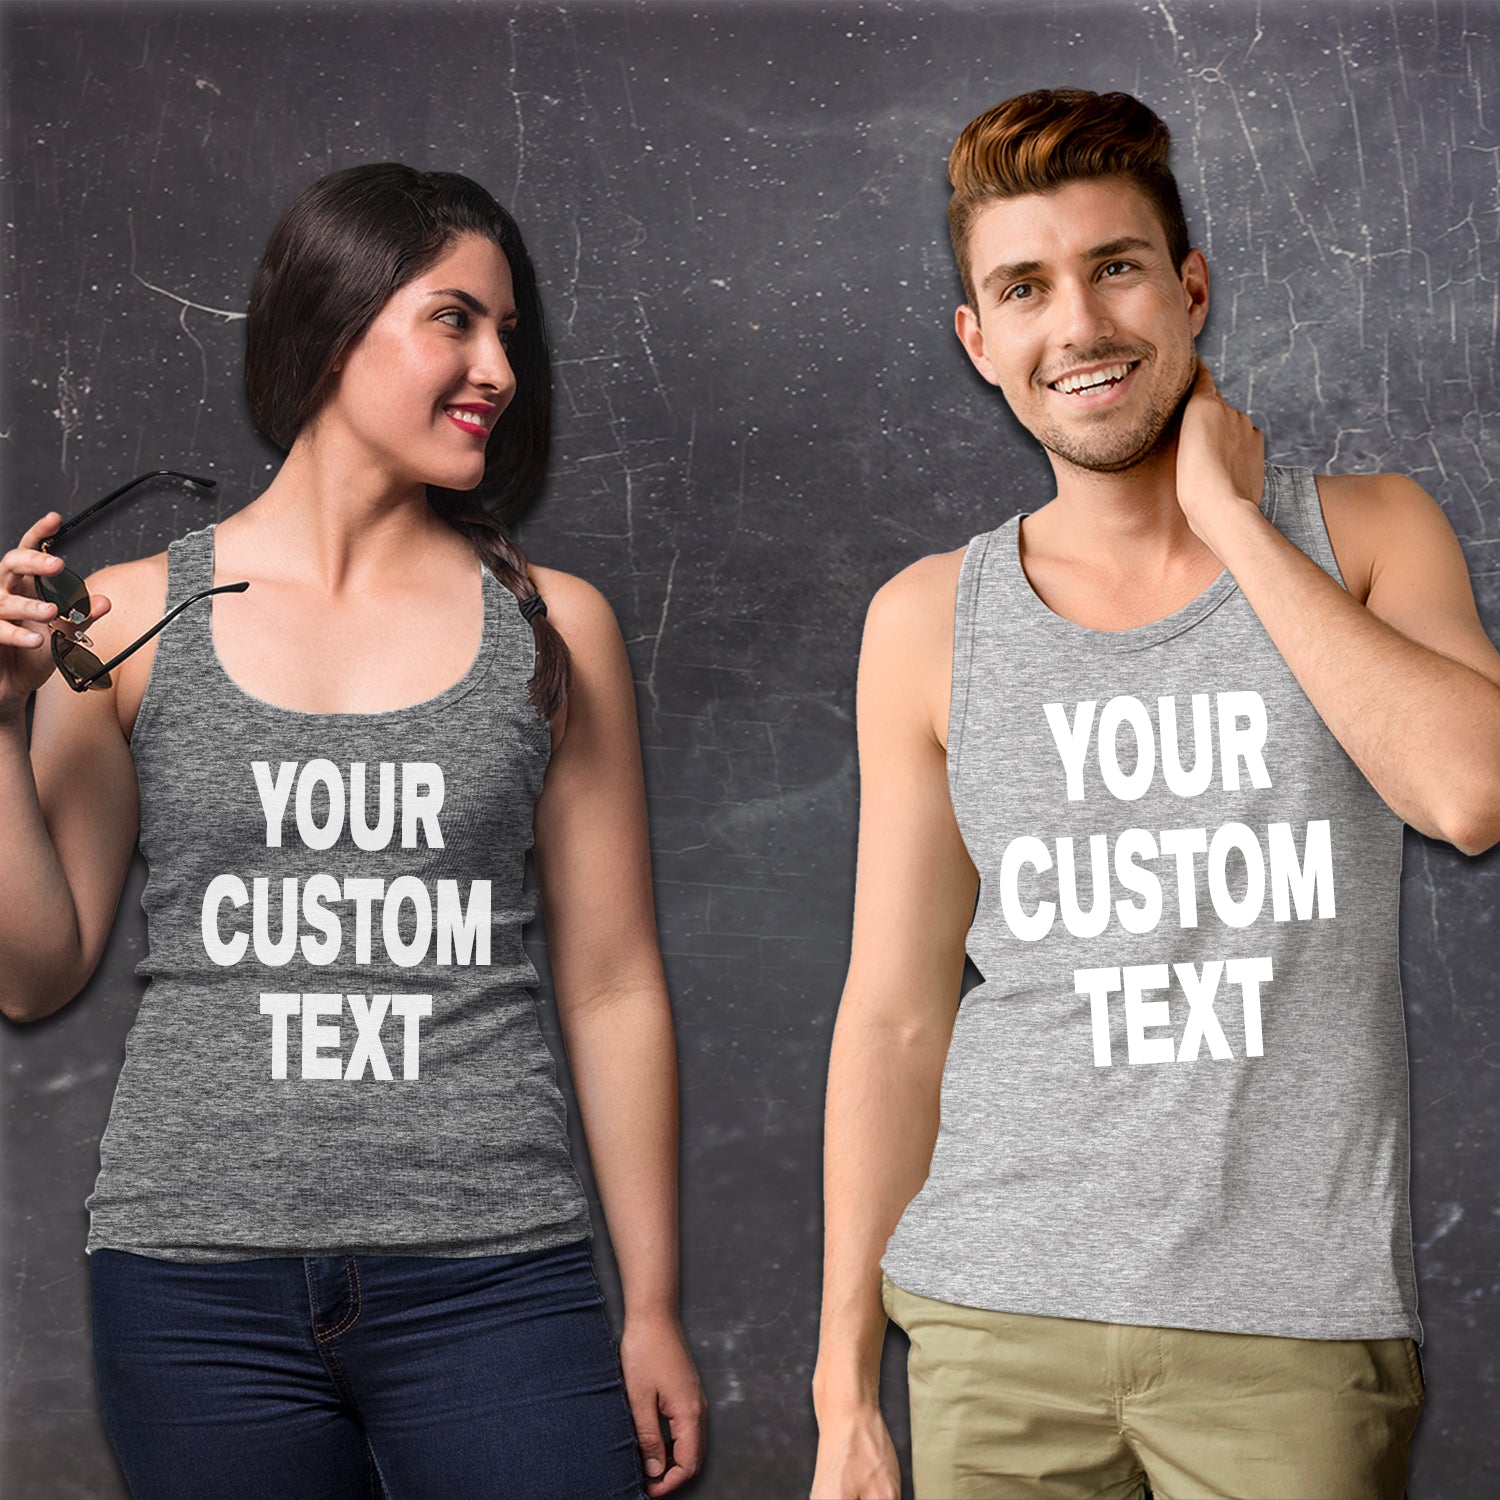 Custom Tank Tops | Women's Racerback Tanks & Men's Tank Tops create your own, custom, CustomClothing, customized, personalized by Expression Tees